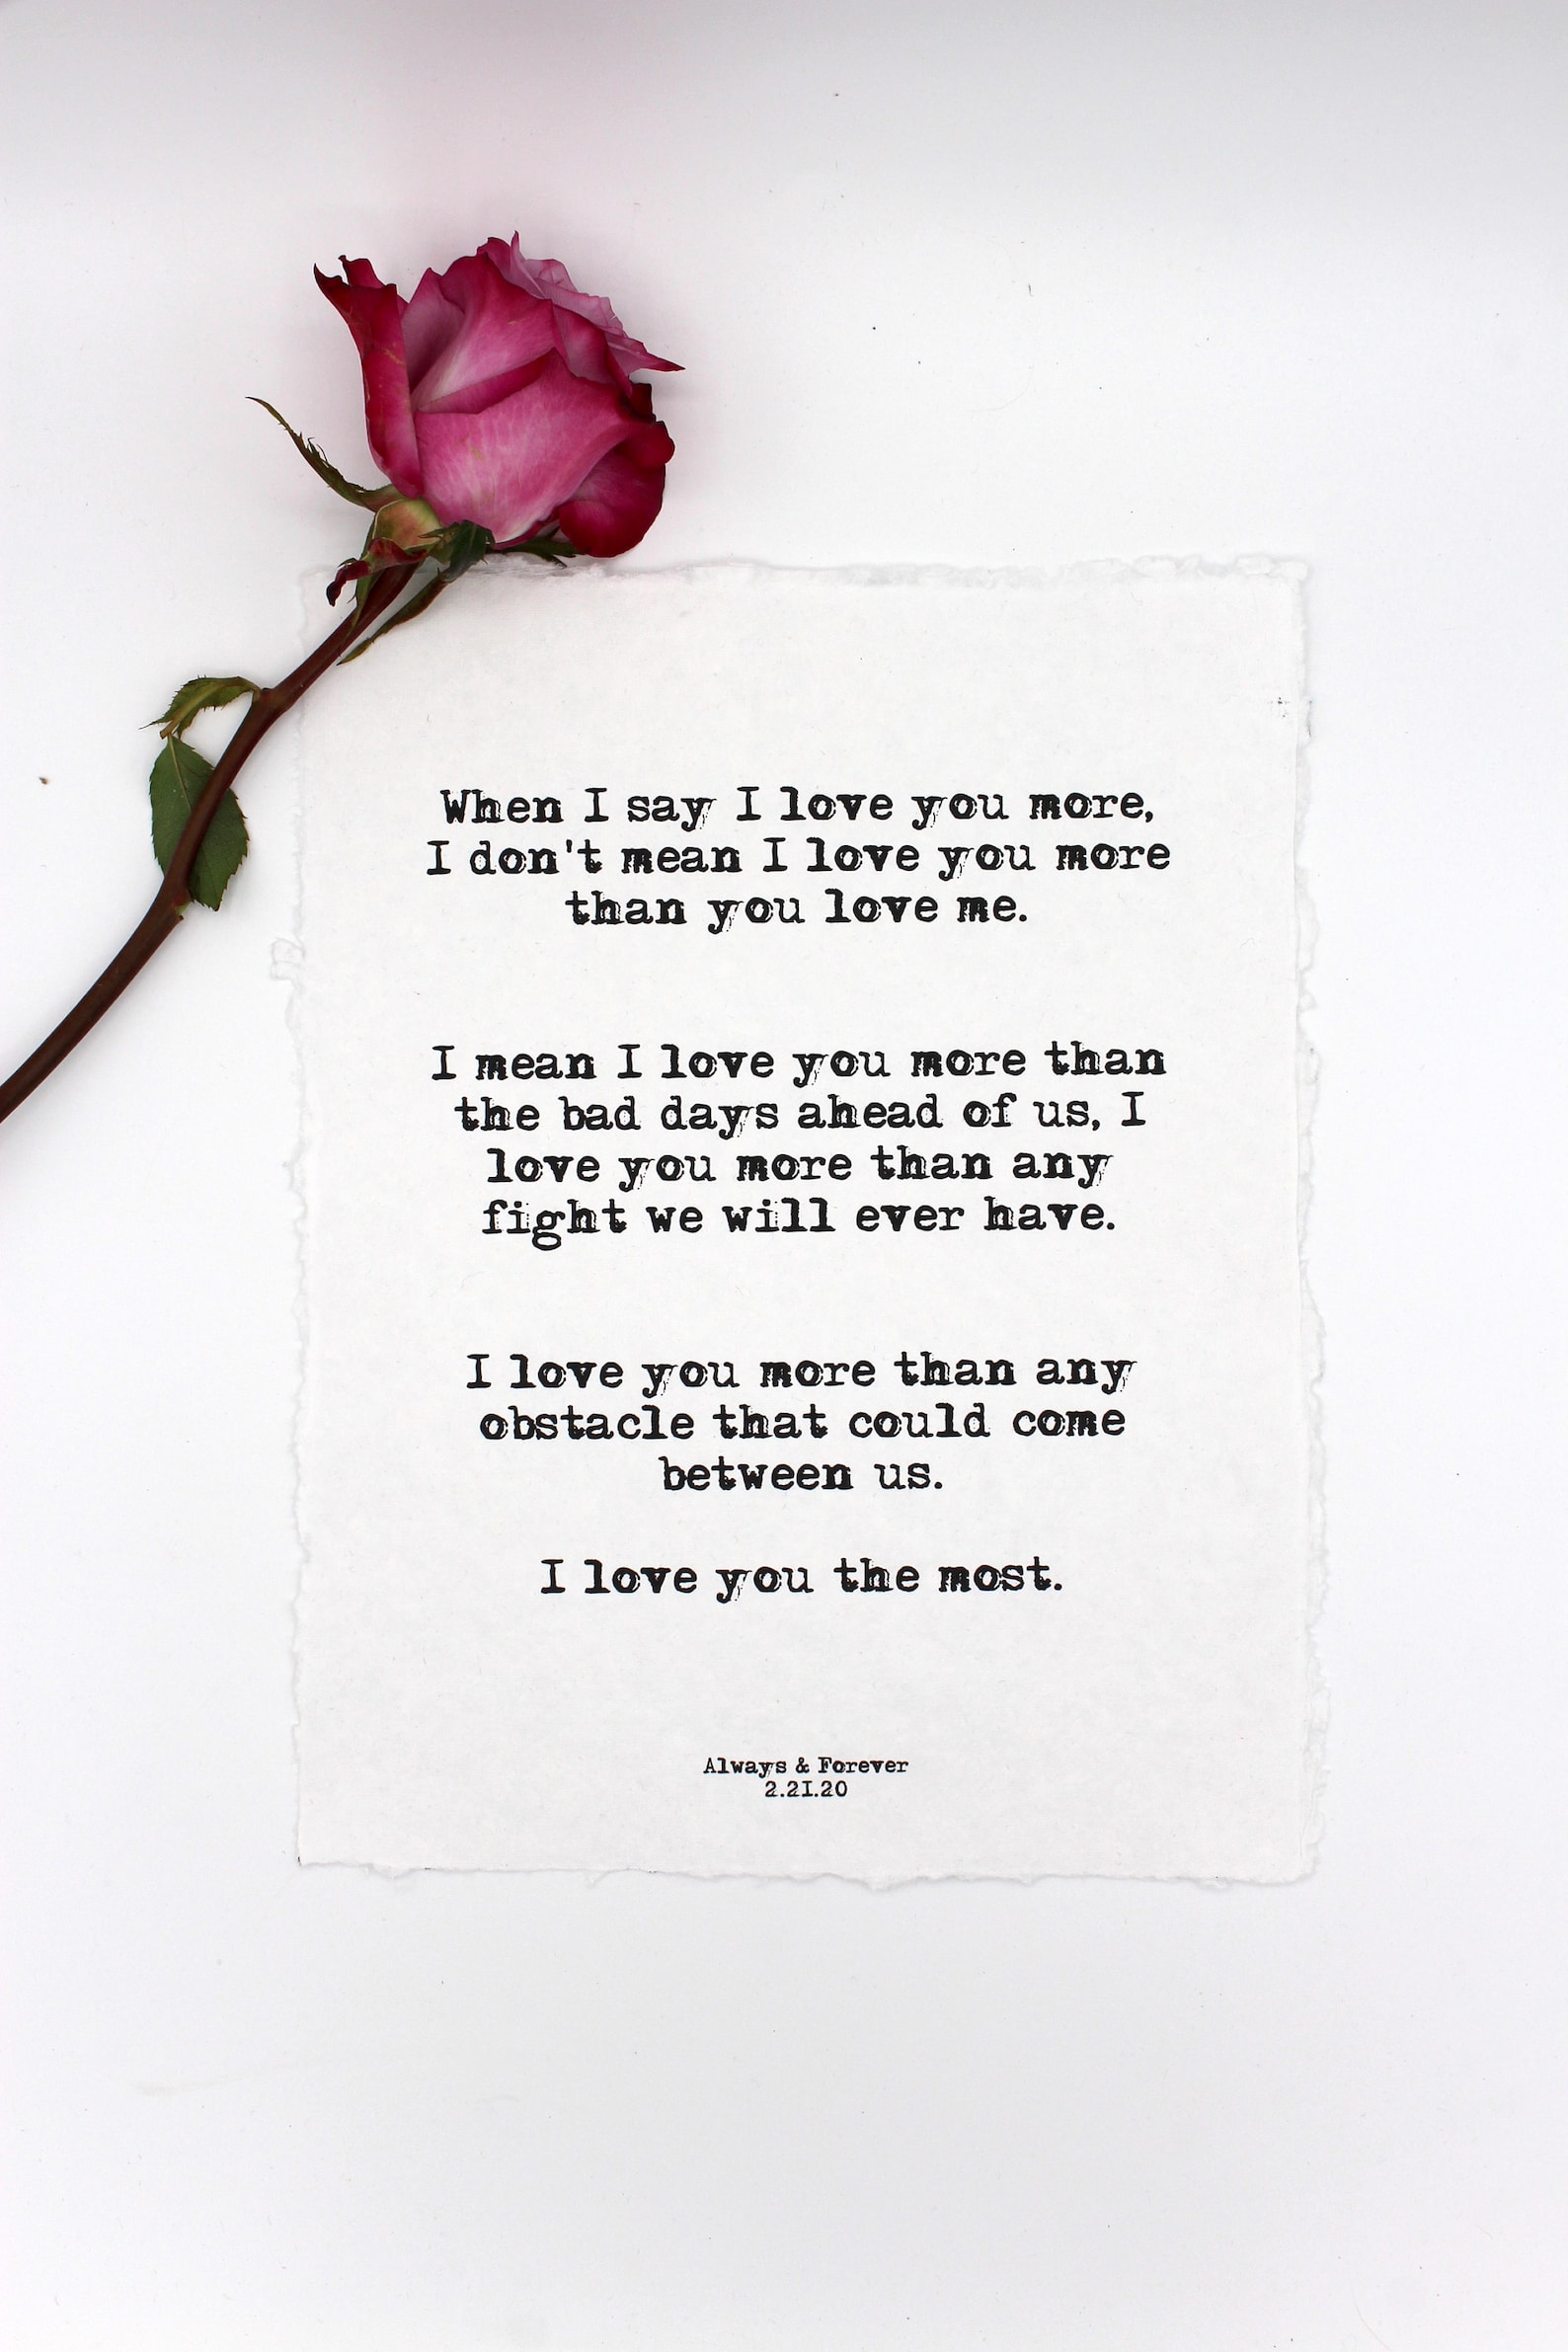 When I say I love you more poem print in typewriter font on | Etsy